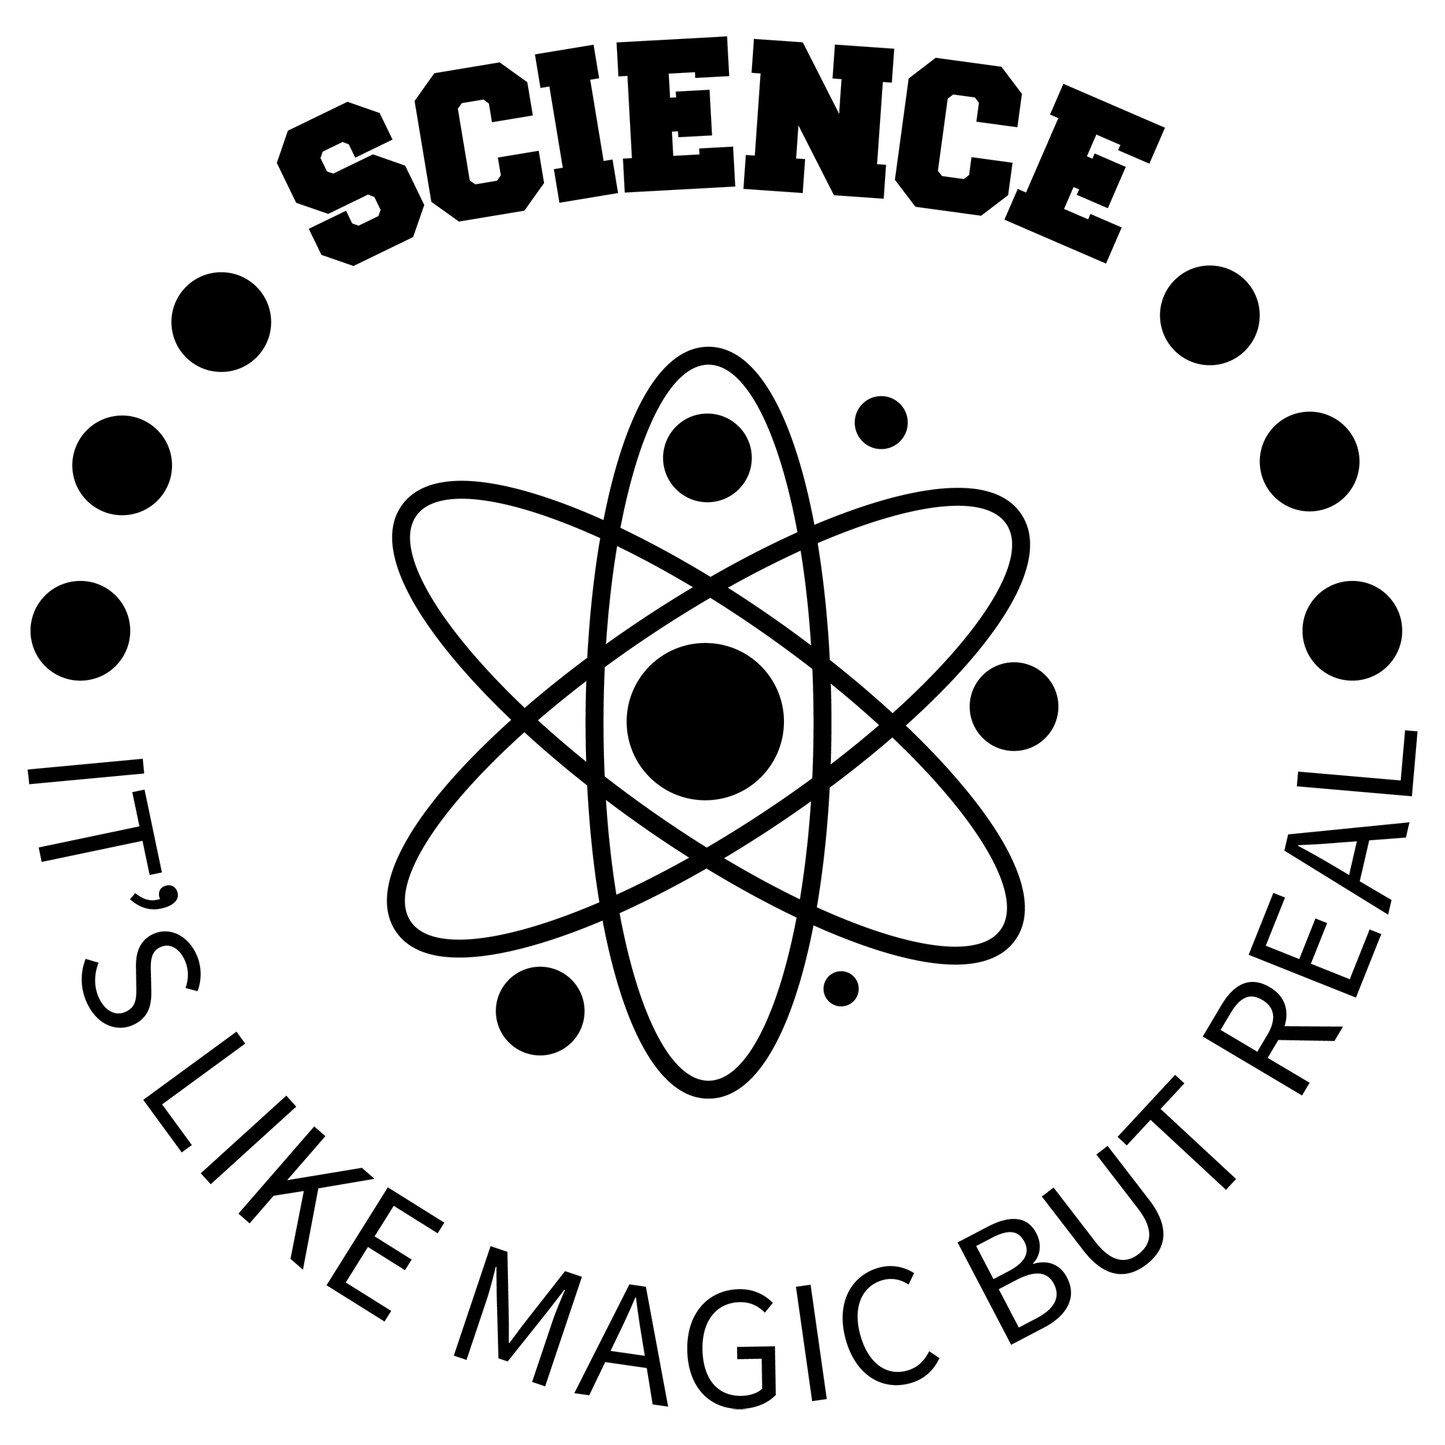 Science It's Like Magic But Real Vinyl Decal Sticker